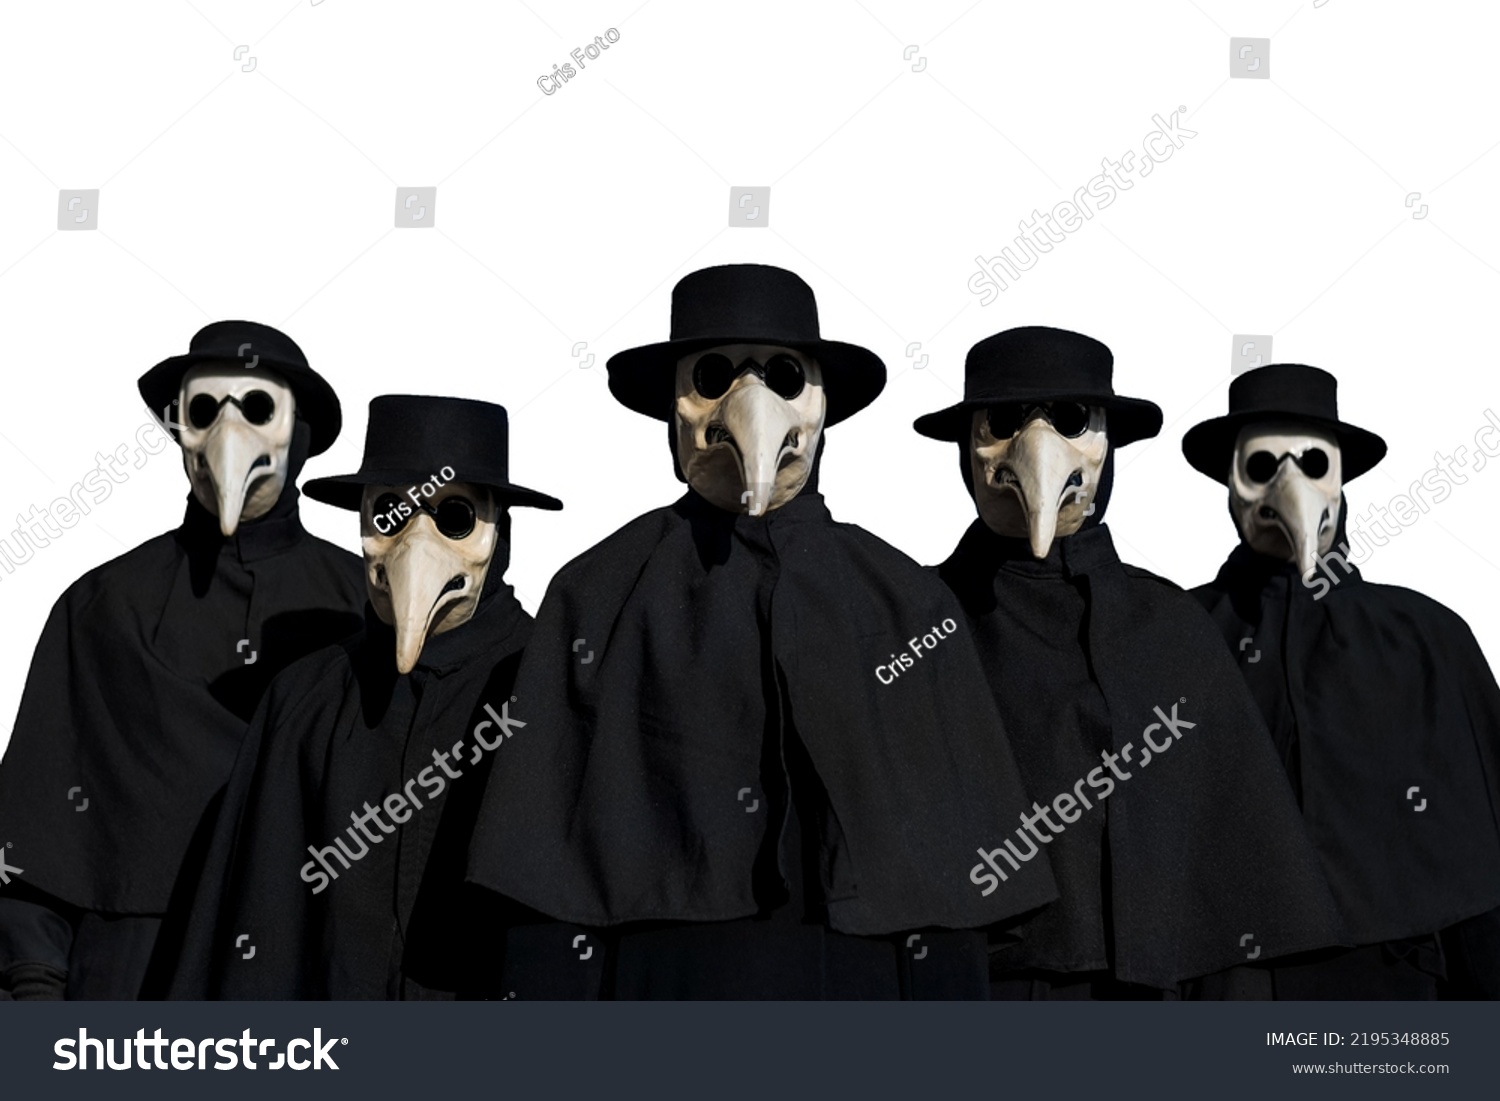 Disease and Fear. Plague Doctor Masks group, traditional costume invented in the 17th century and historical character of Venice Carnival (isolated on white background) #2195348885